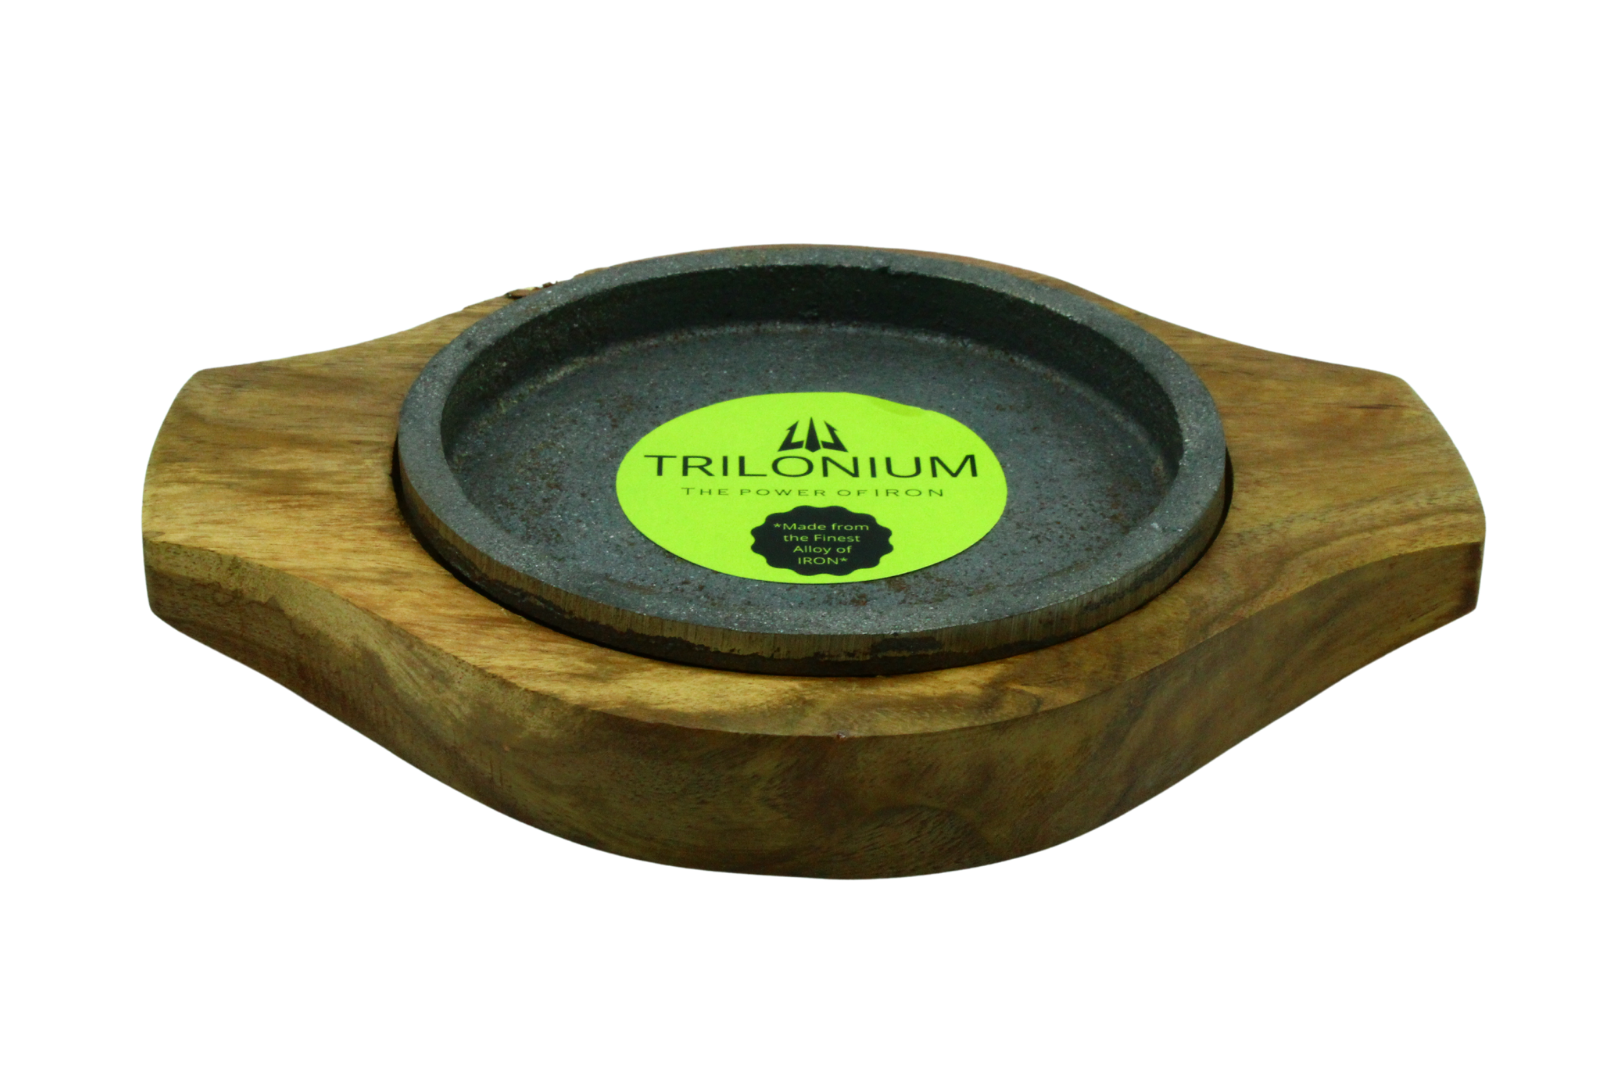 Cast Iron Sizzler Plate With Wooden Base | 5 inches | 0.77 KG TRILONIUM | Cast Iron Cookware